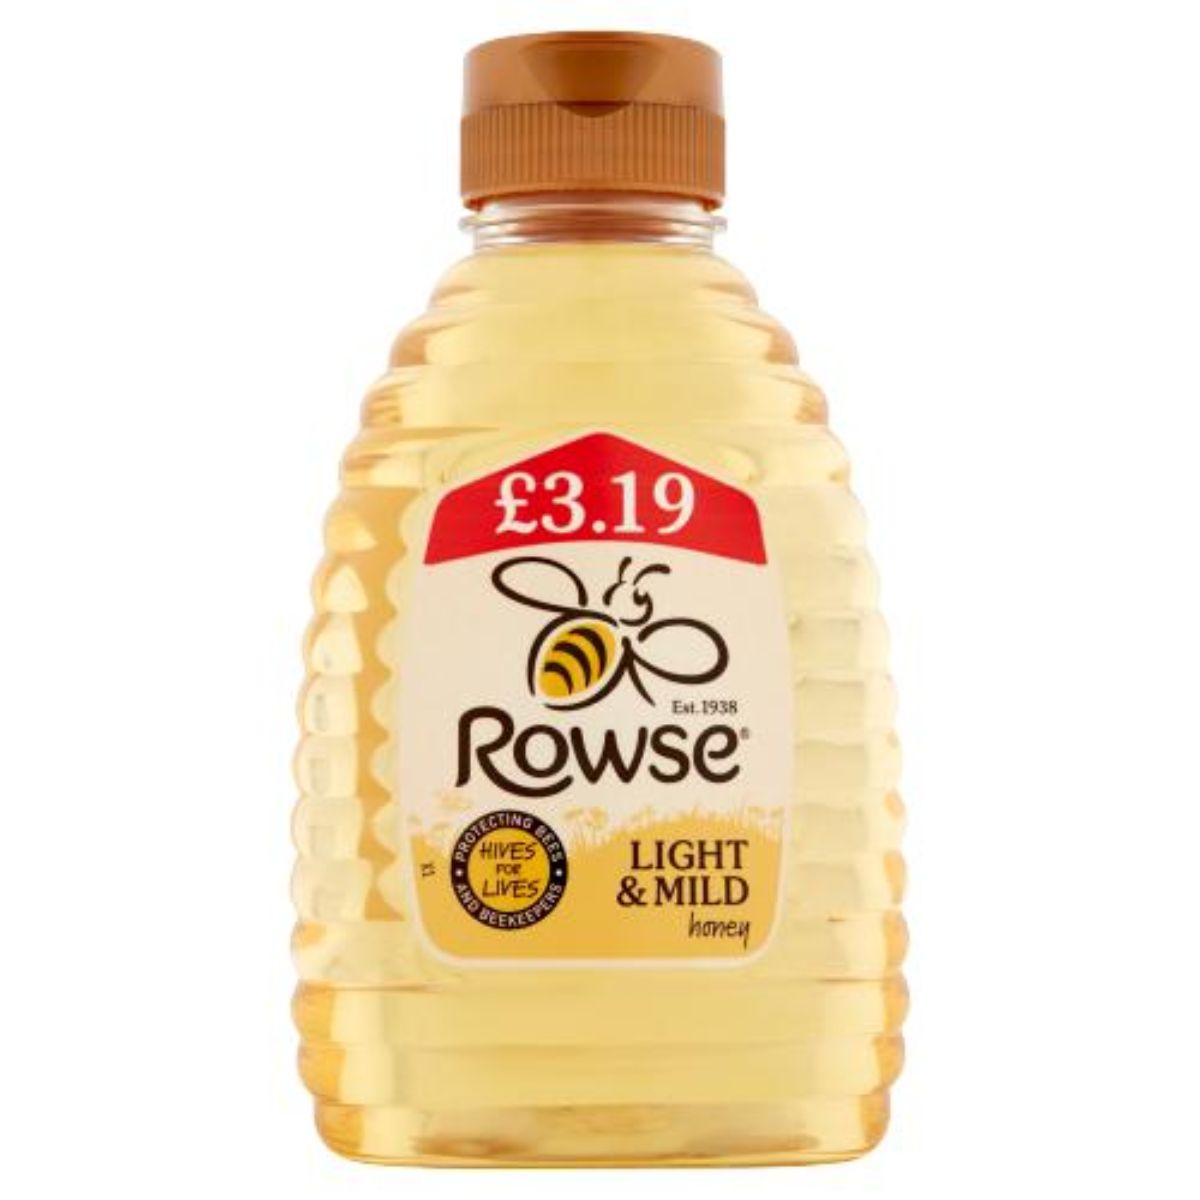 A bottle of Rowse - Light & Mild Honey - 340g with a price tag of £3.19.